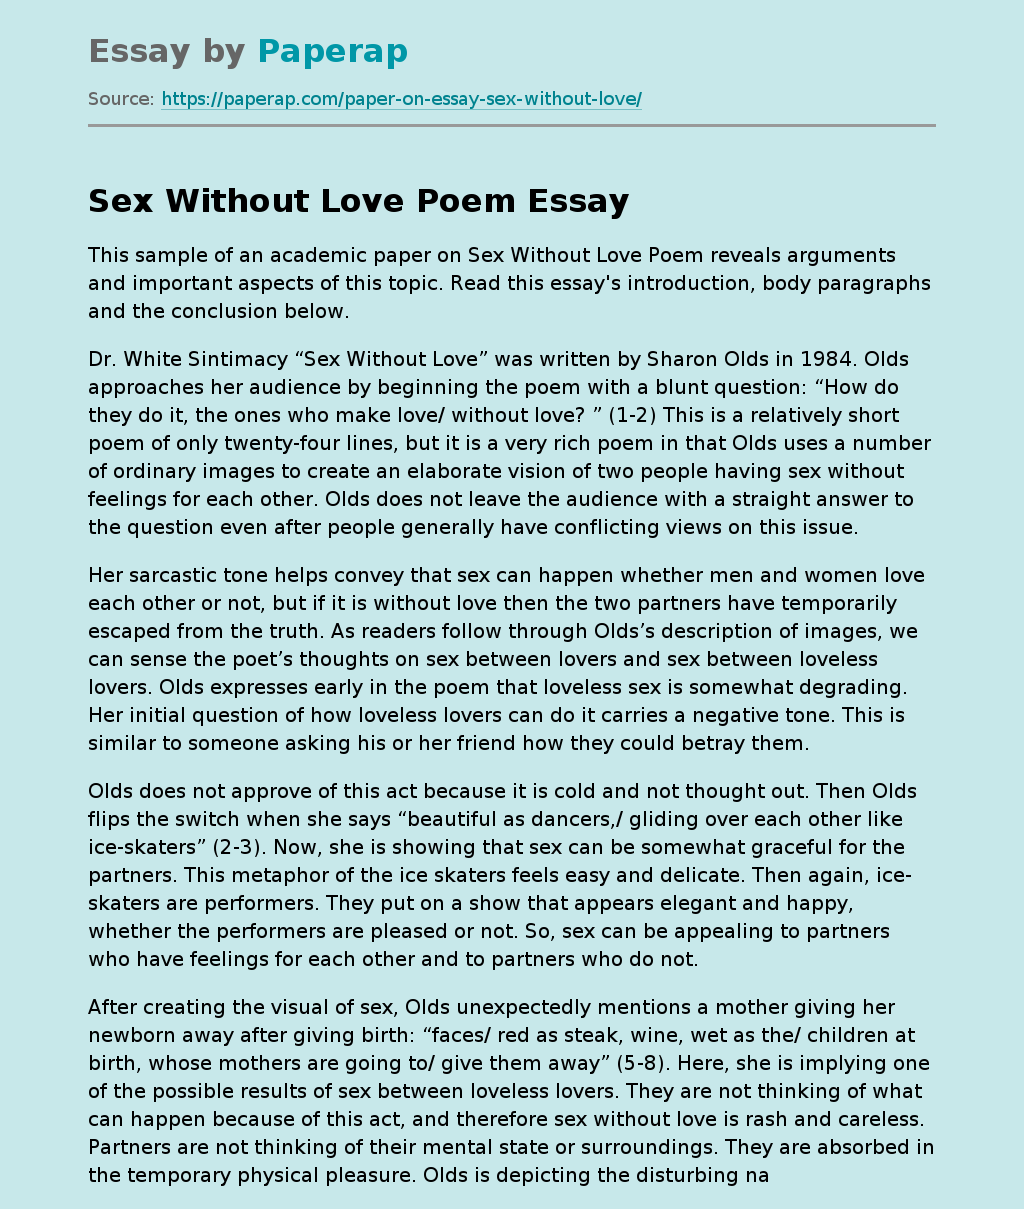 Sex Without Love Poem